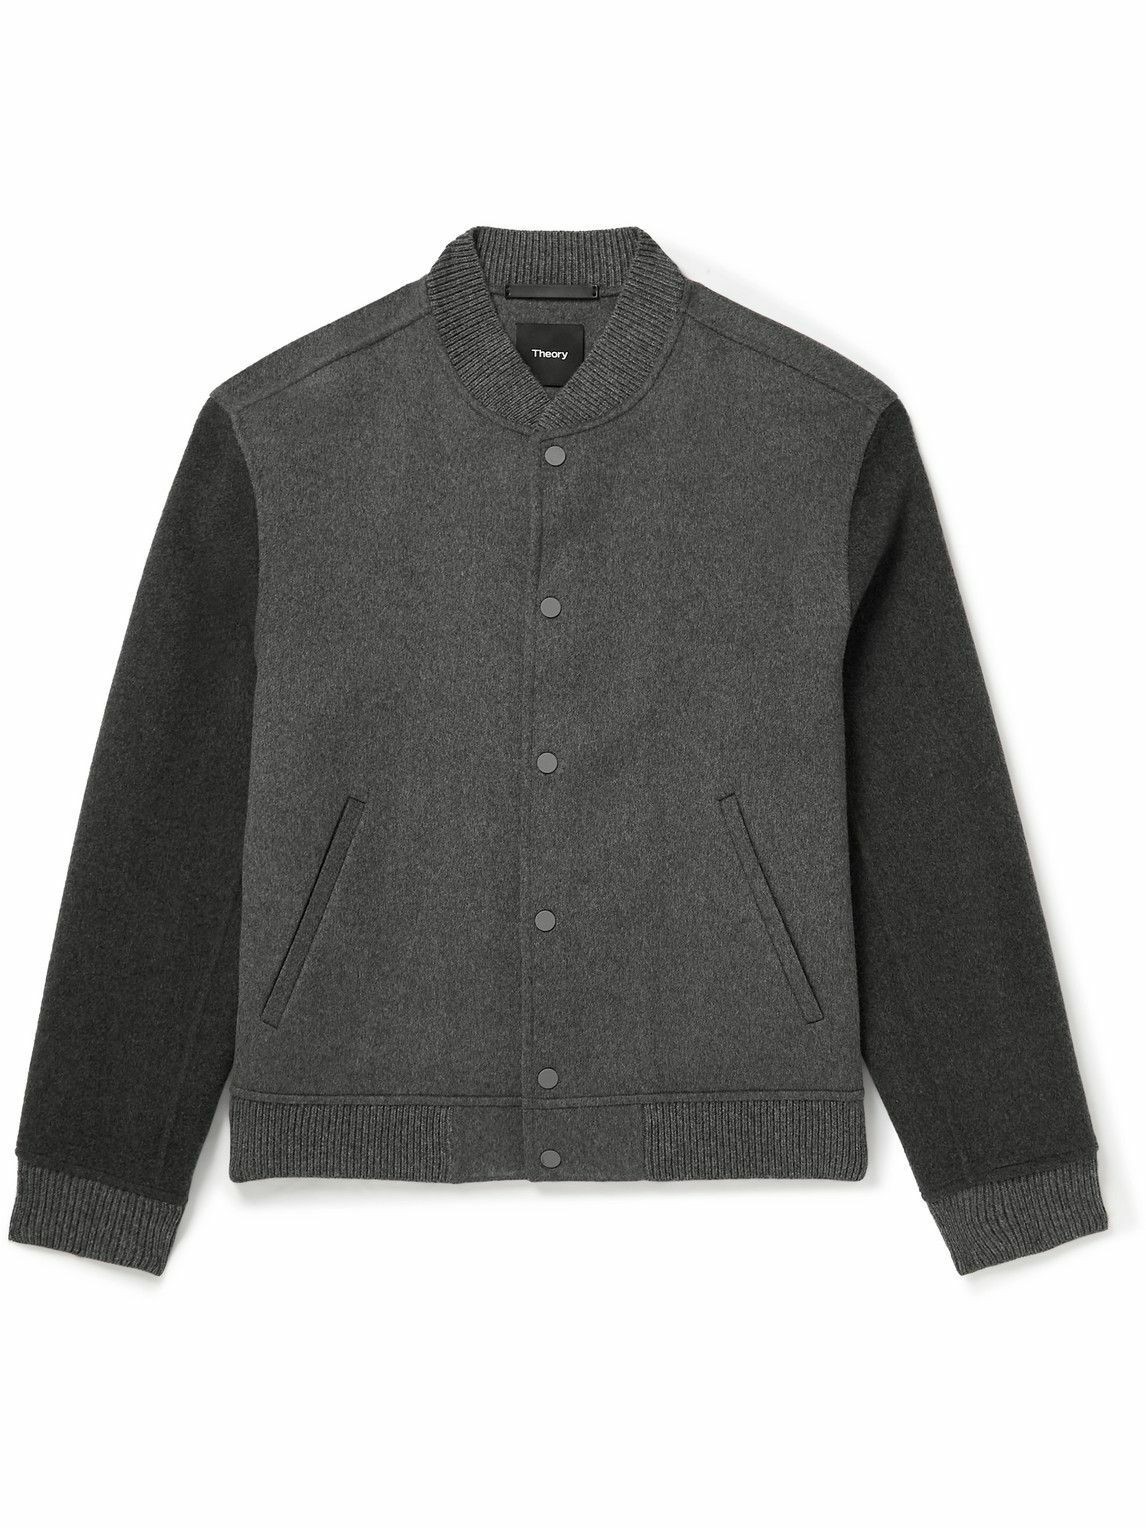 Theory - Wool and Cashmere-Blend Bomber Jacket - Gray Theory